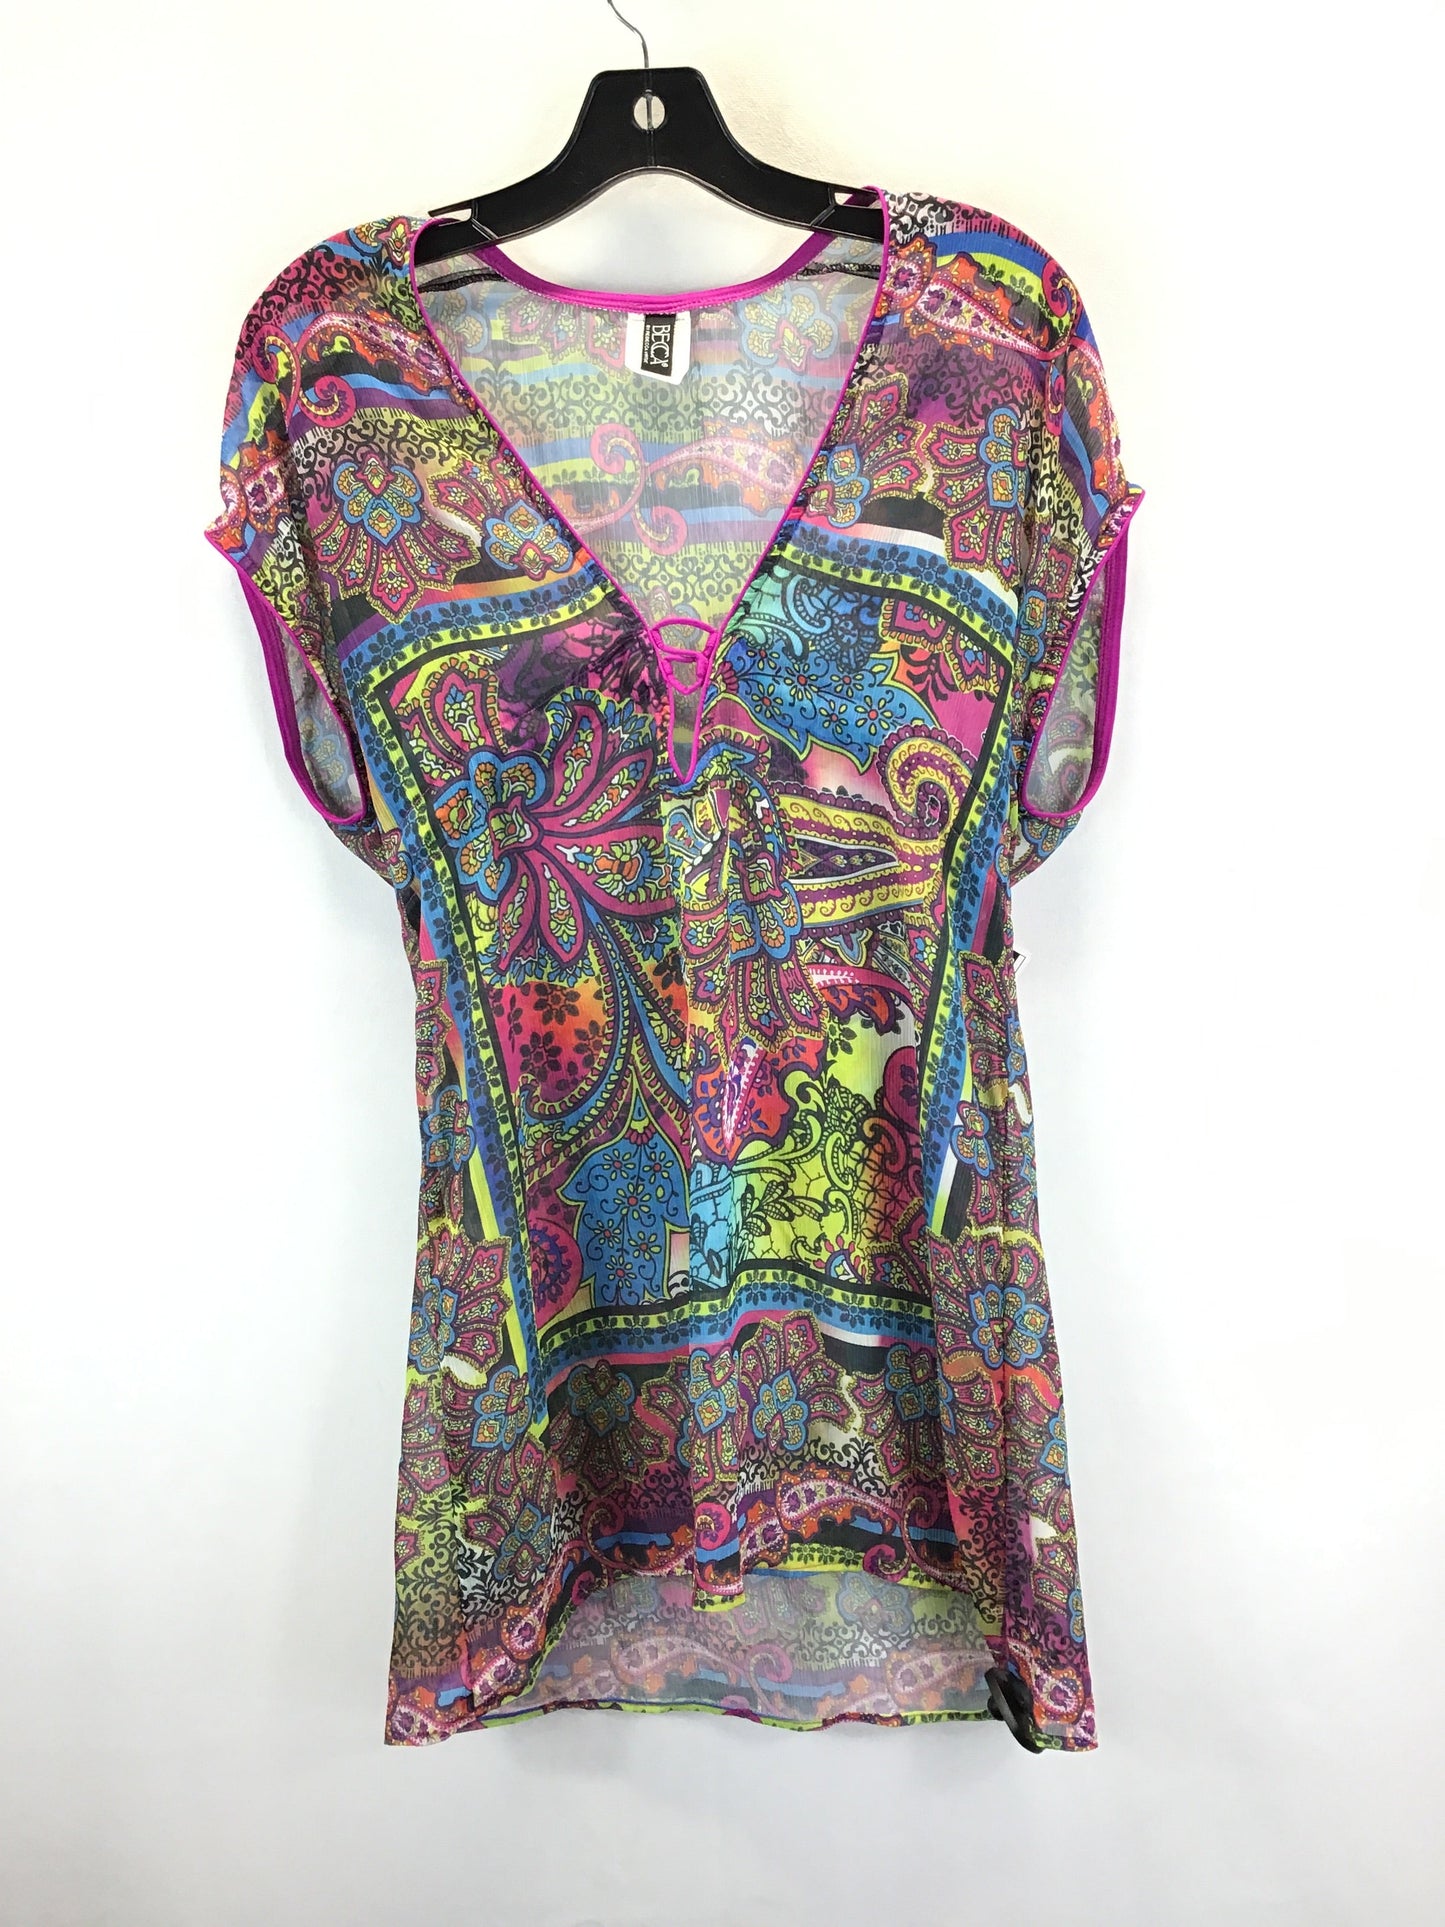 Multi-colored Swimwear Cover-up Clothes Mentor, Size Petite   S